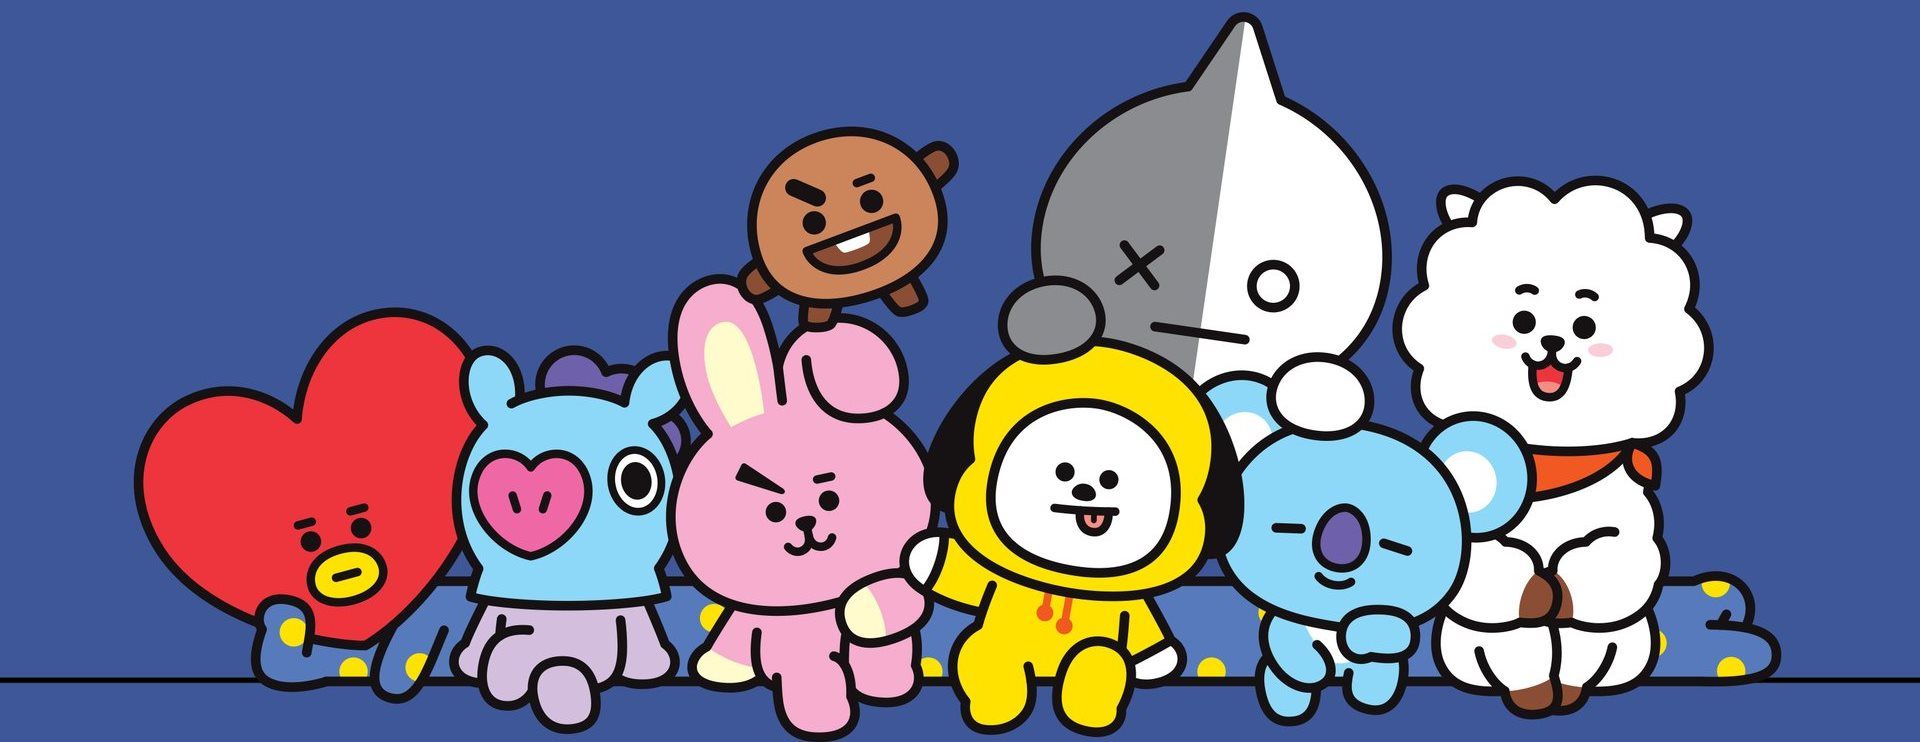 BT21 Characters Wallpapers - Wallpaper Cave